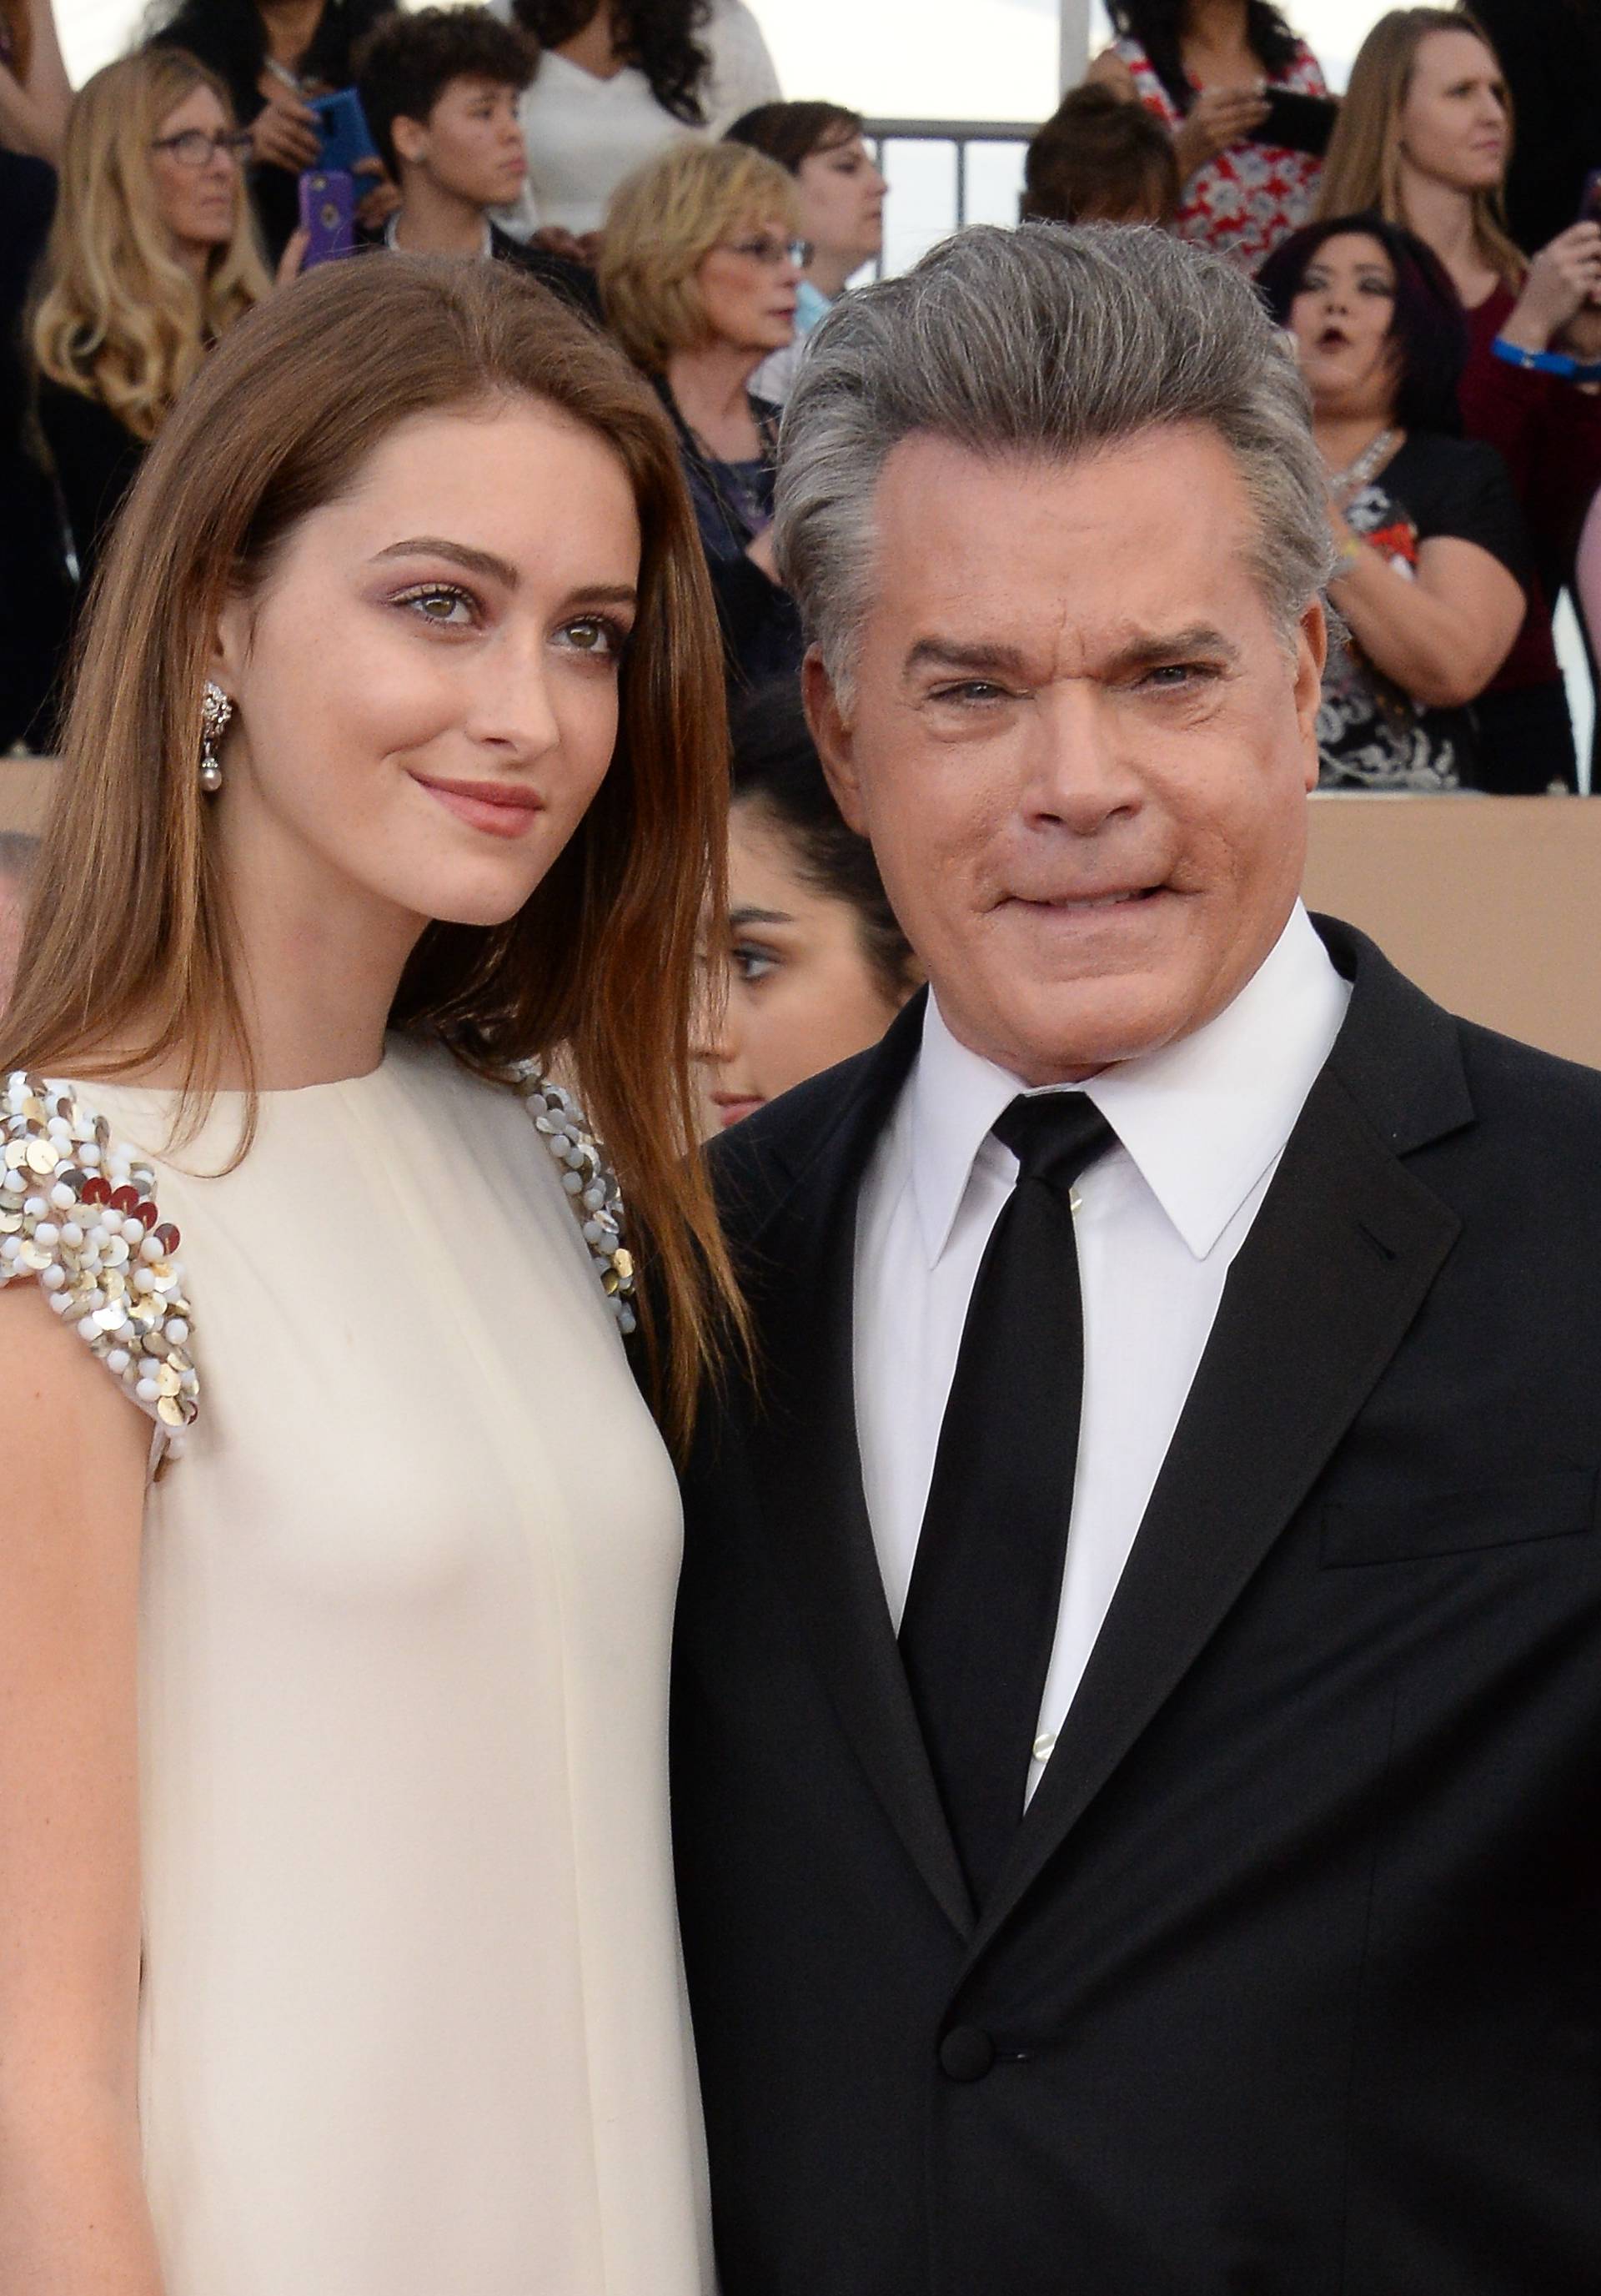 Karsen Liotta and Ray Liotta attend the 22nd annual Screen Actors Guild Awards